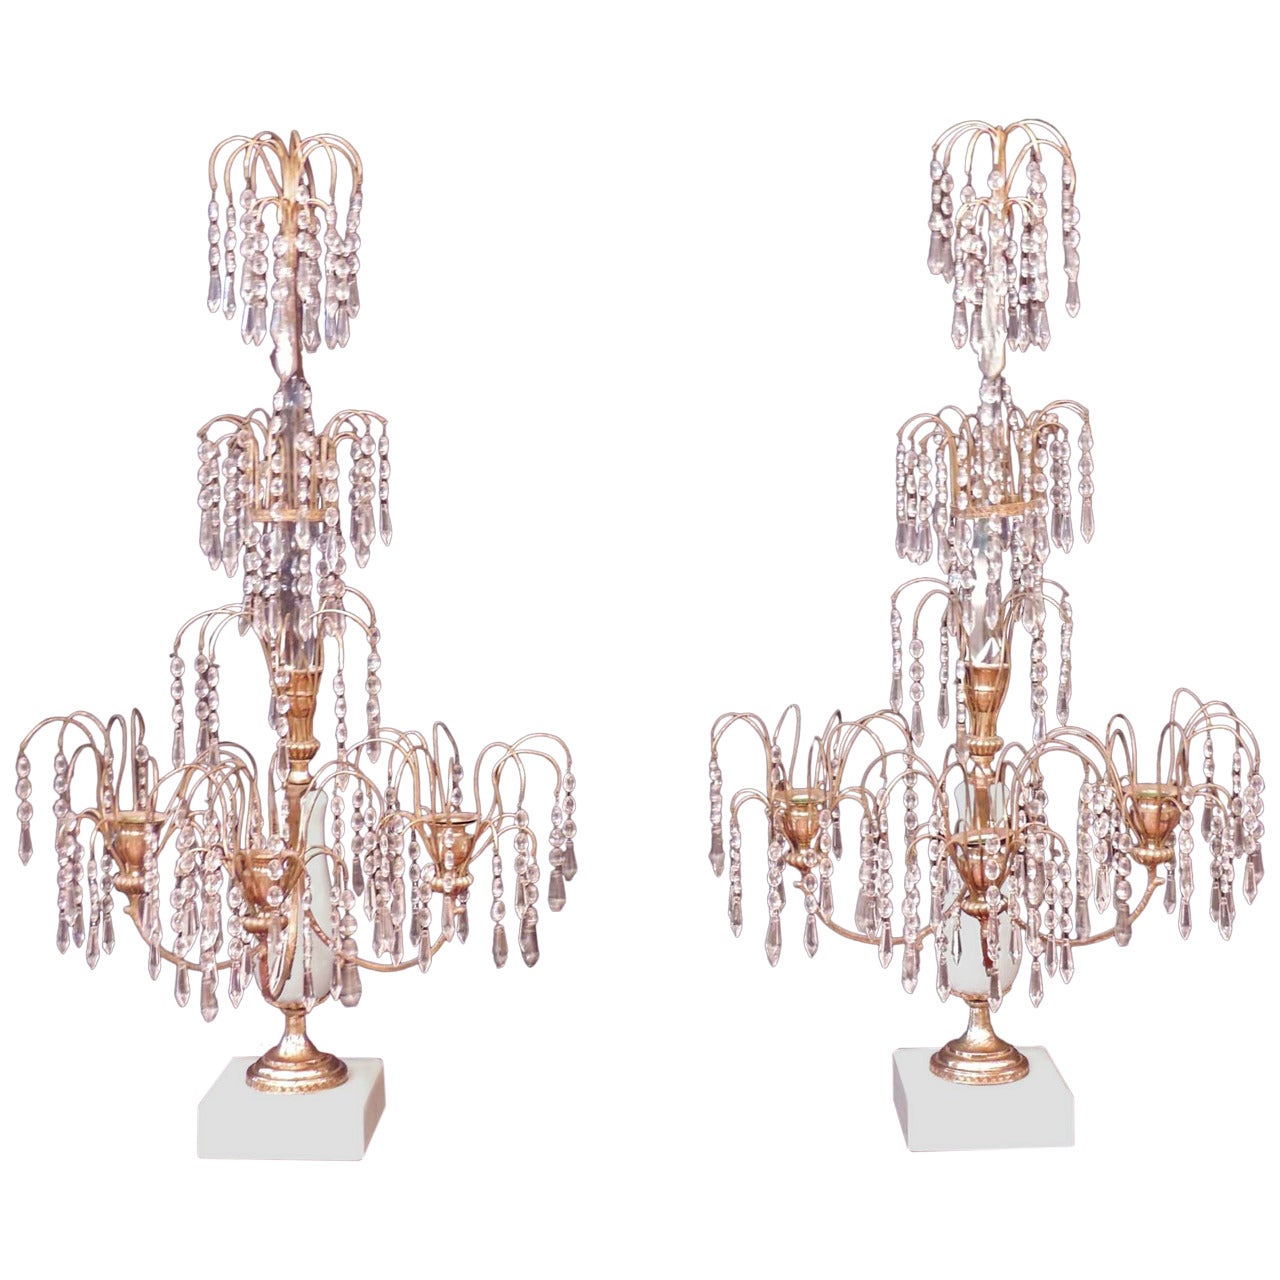 Pair of 19th C French Crystal Candelabras